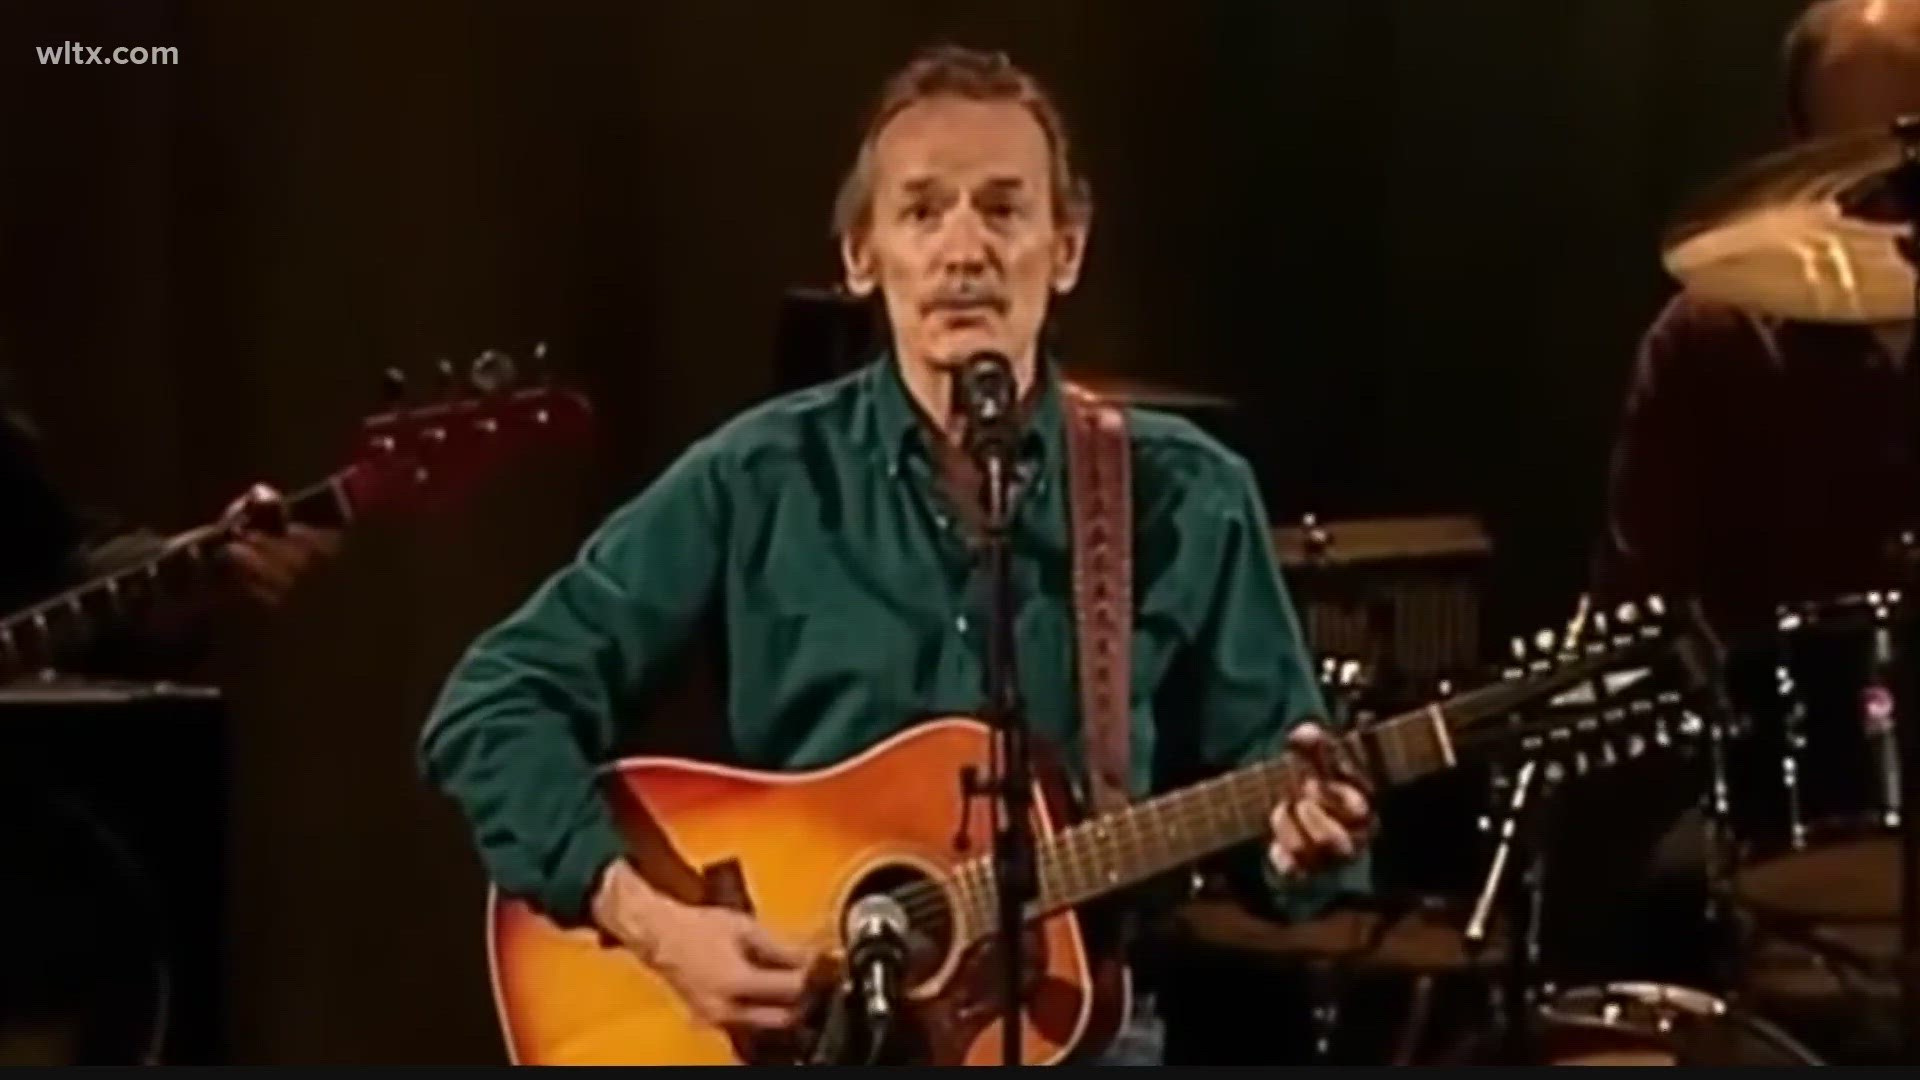 Gordon Lightfoot, Canada's legendary folk singer-songwriter whose hits include “Early Morning Rain” and “The Wreck of the Edmund Fitzgerald," died on Monday.